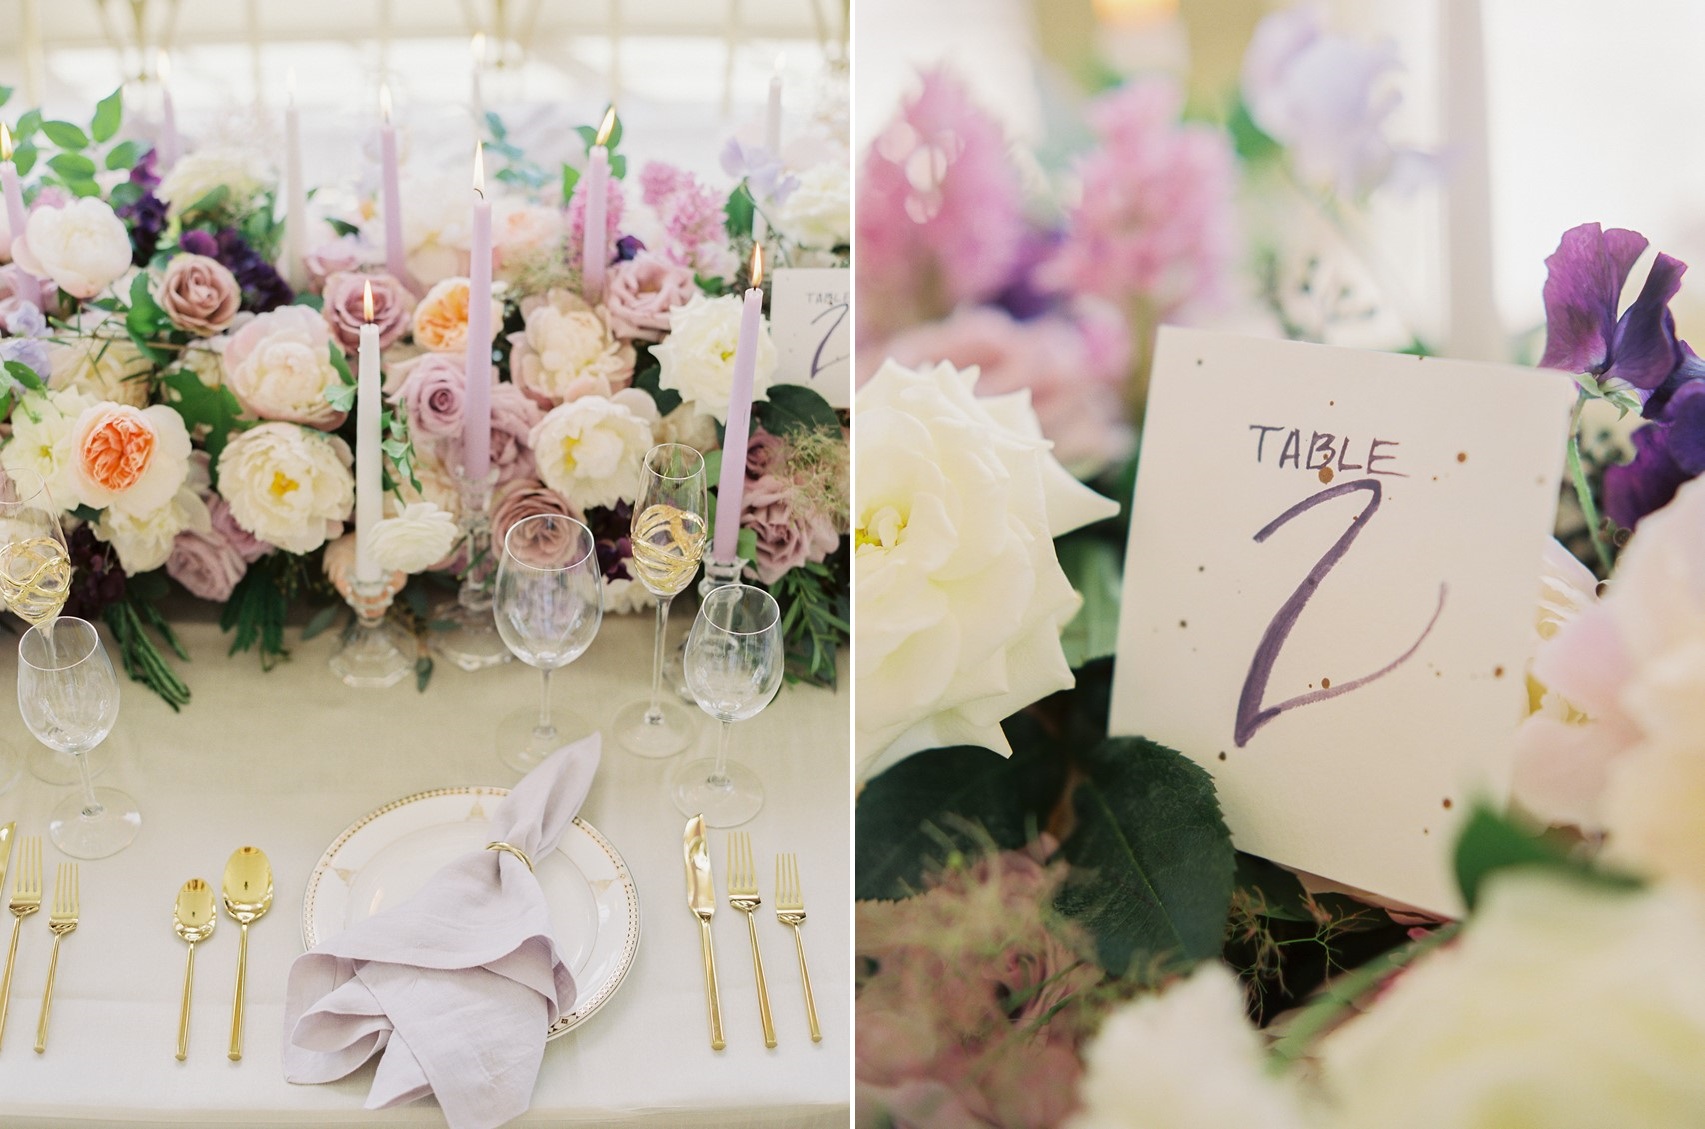 Romantic Vintage Wedding Place Setting & Table Number // Photography ~ CJK Visuals